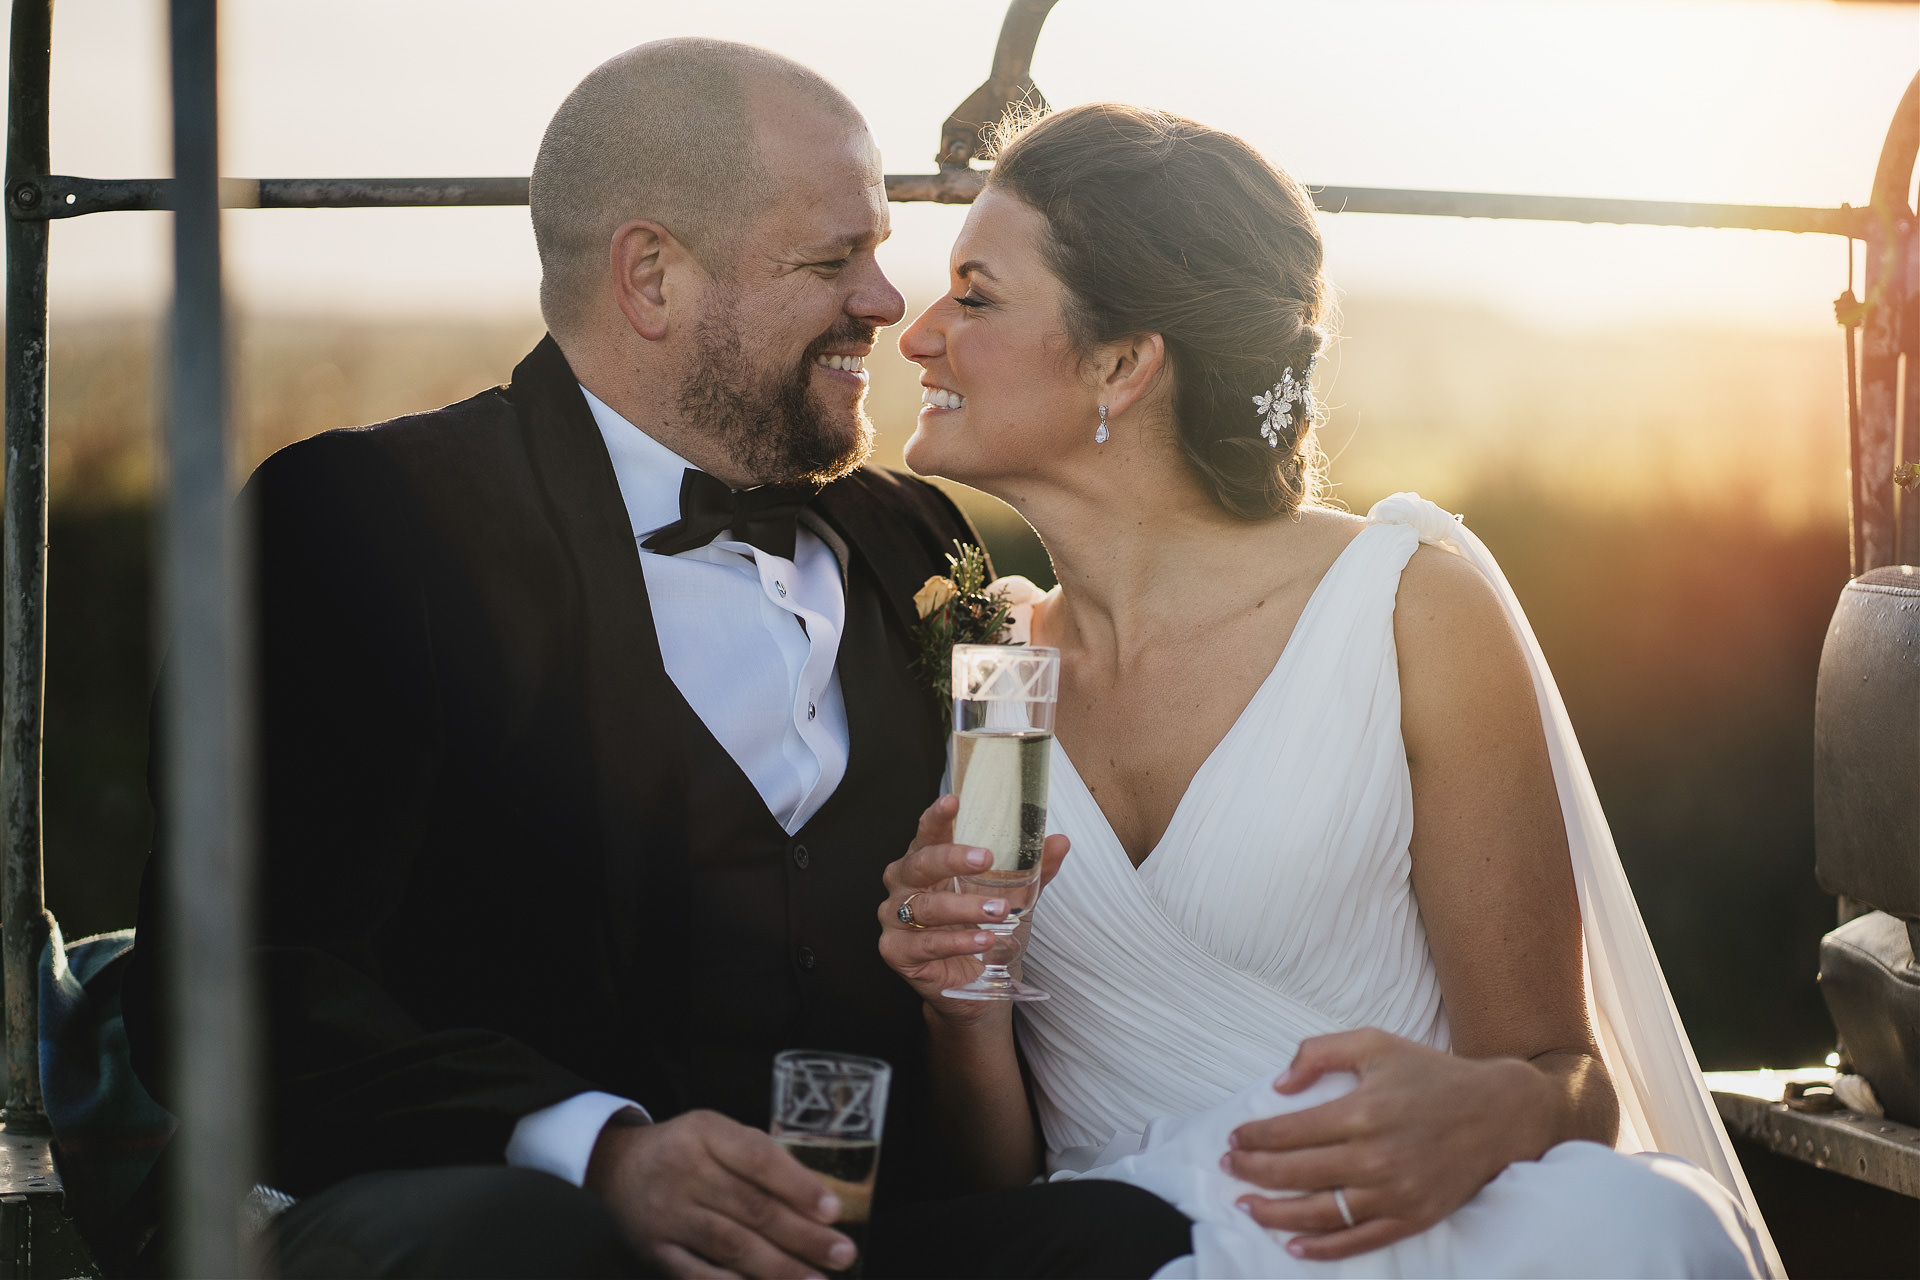 Bride and groom smiling at each other with sunset behind